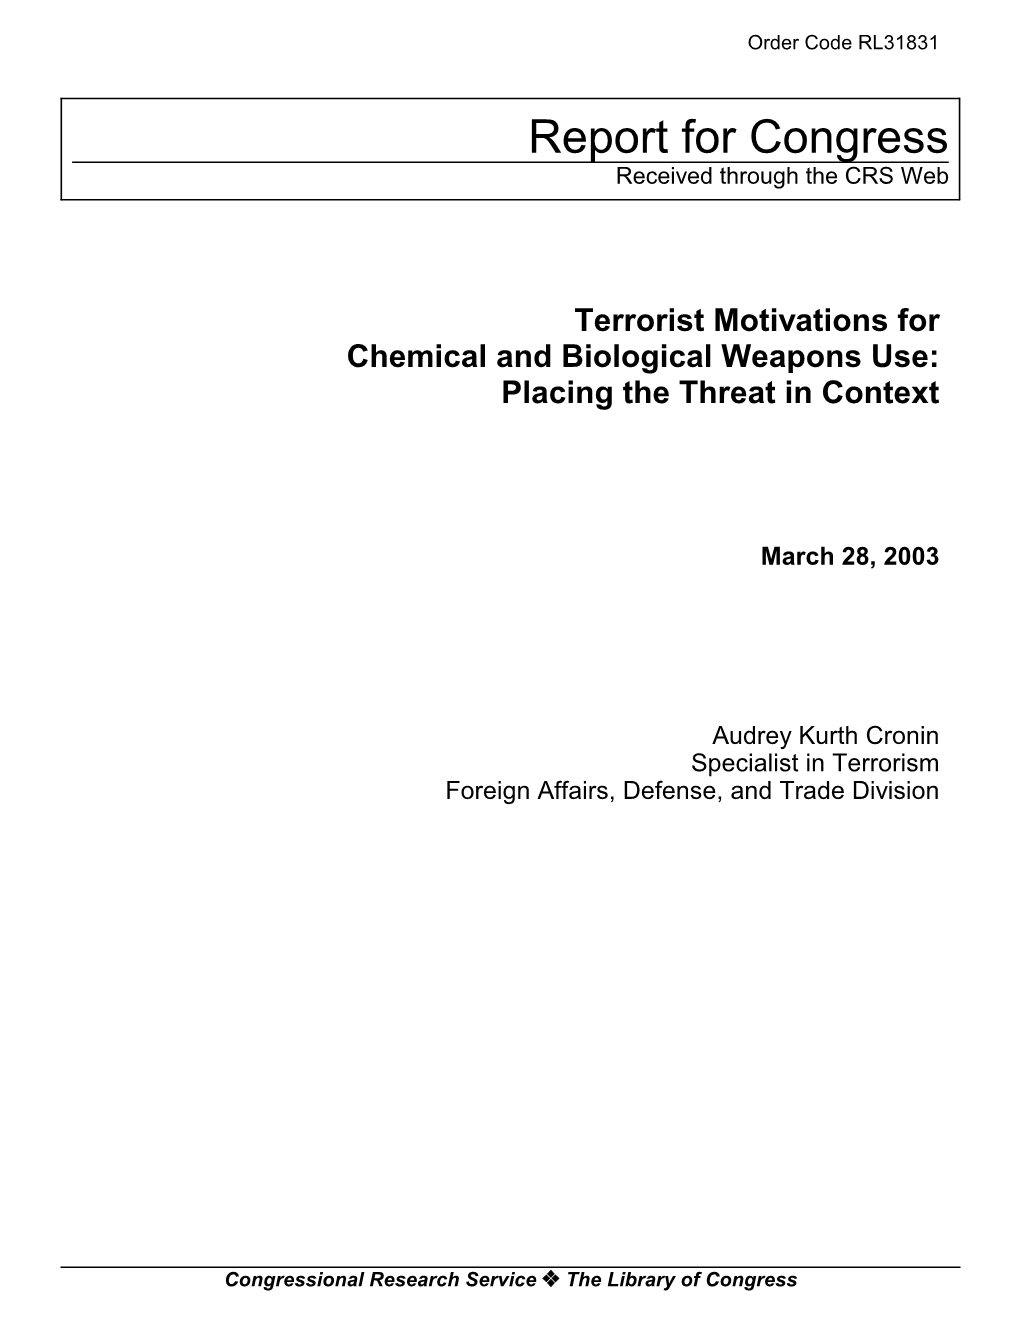 Terrorist Motivations for Chemical and Biological Weapons Use: Placing the Threat in Context